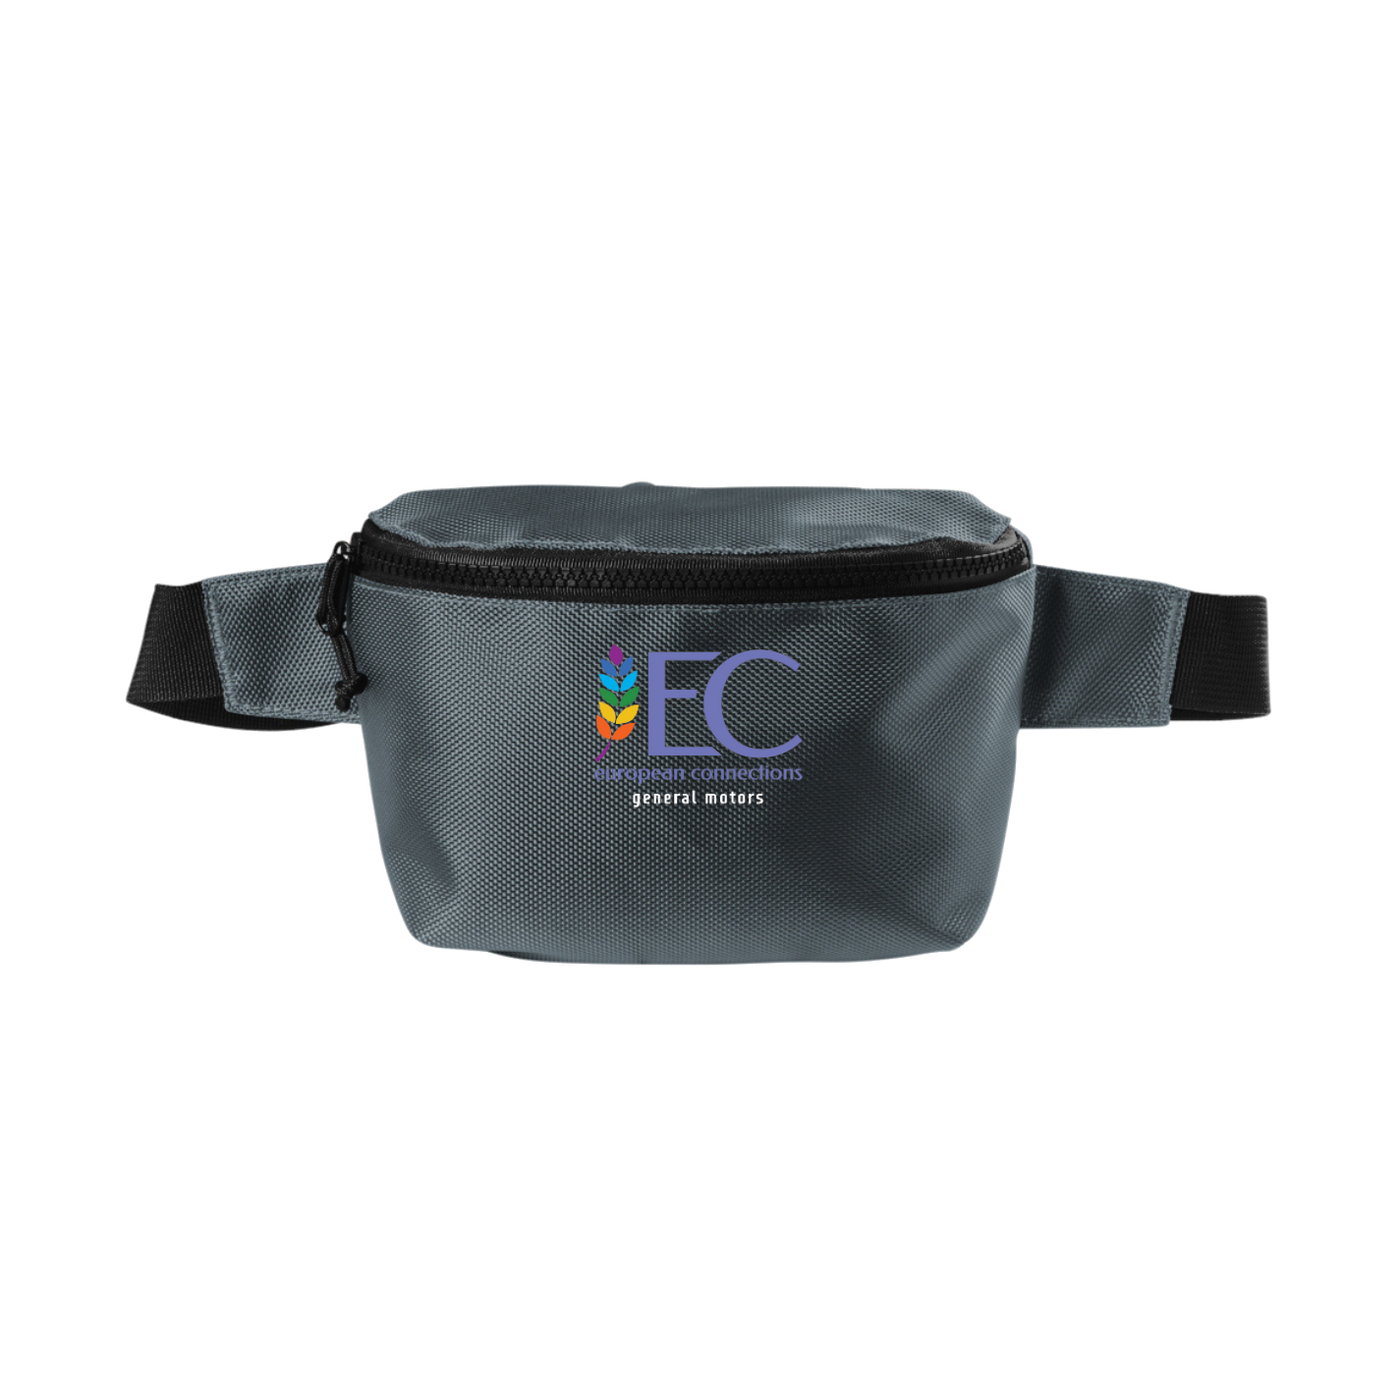 GM European Connections ERG Hip Pack